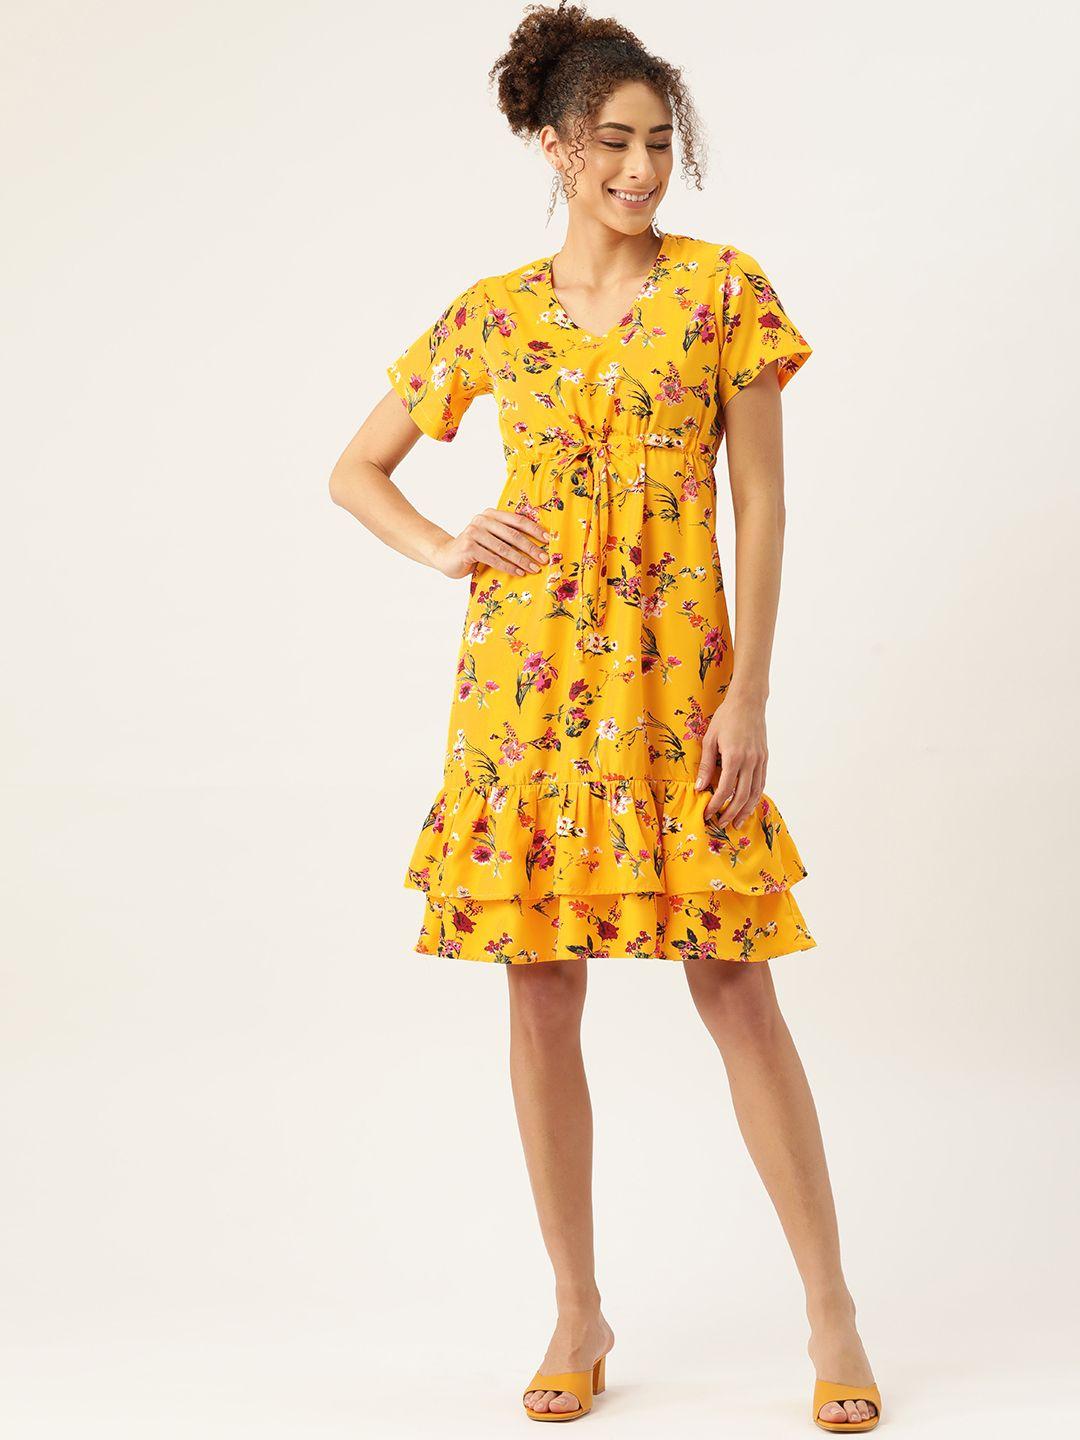 WISSTLER Yellow Floral Crepe A-Line Dress